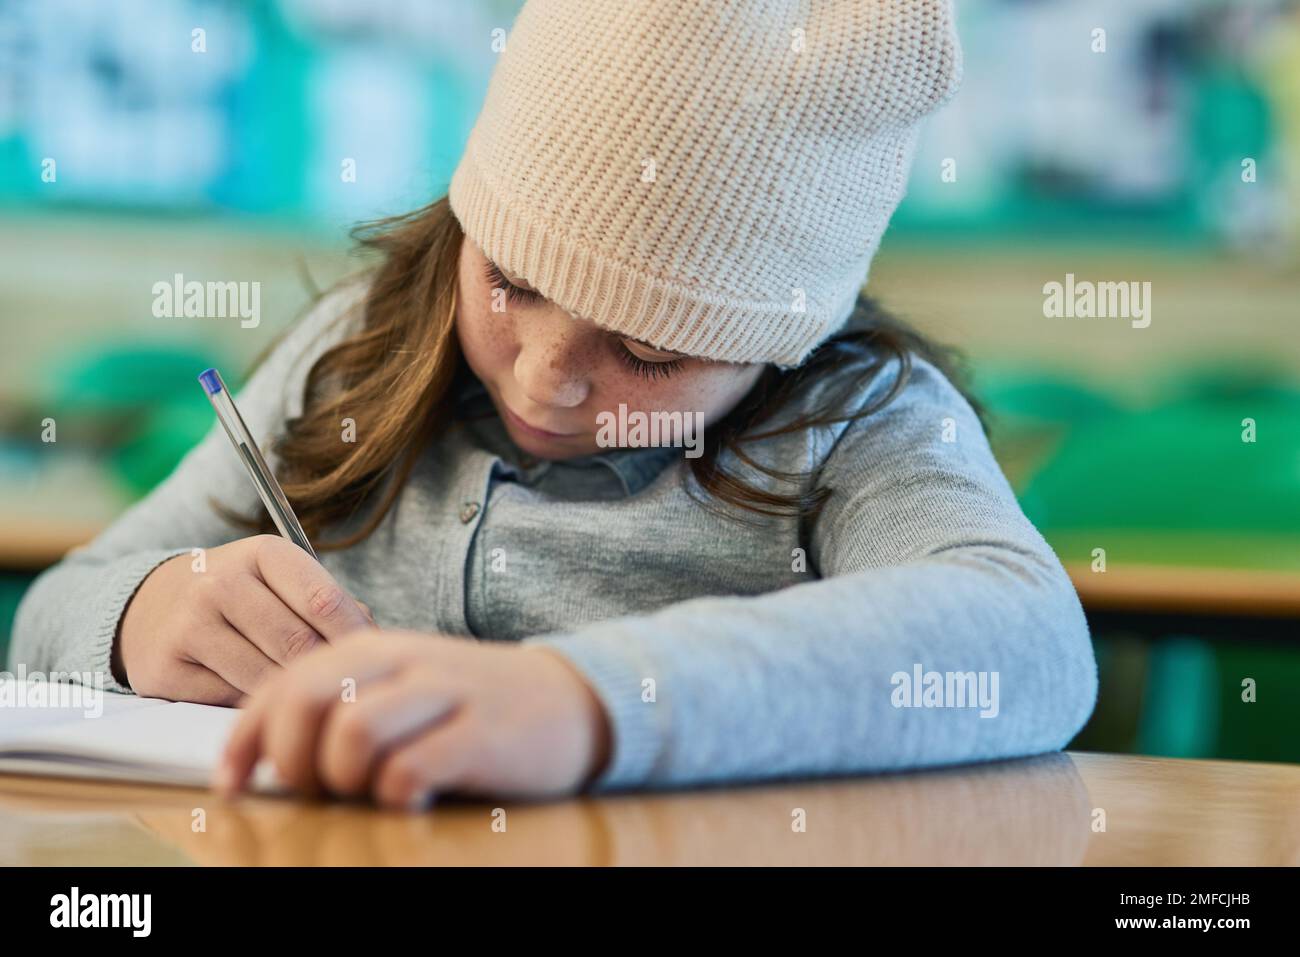 She knows all the answers to the test. an elementary school girl working in class. Stock Photo